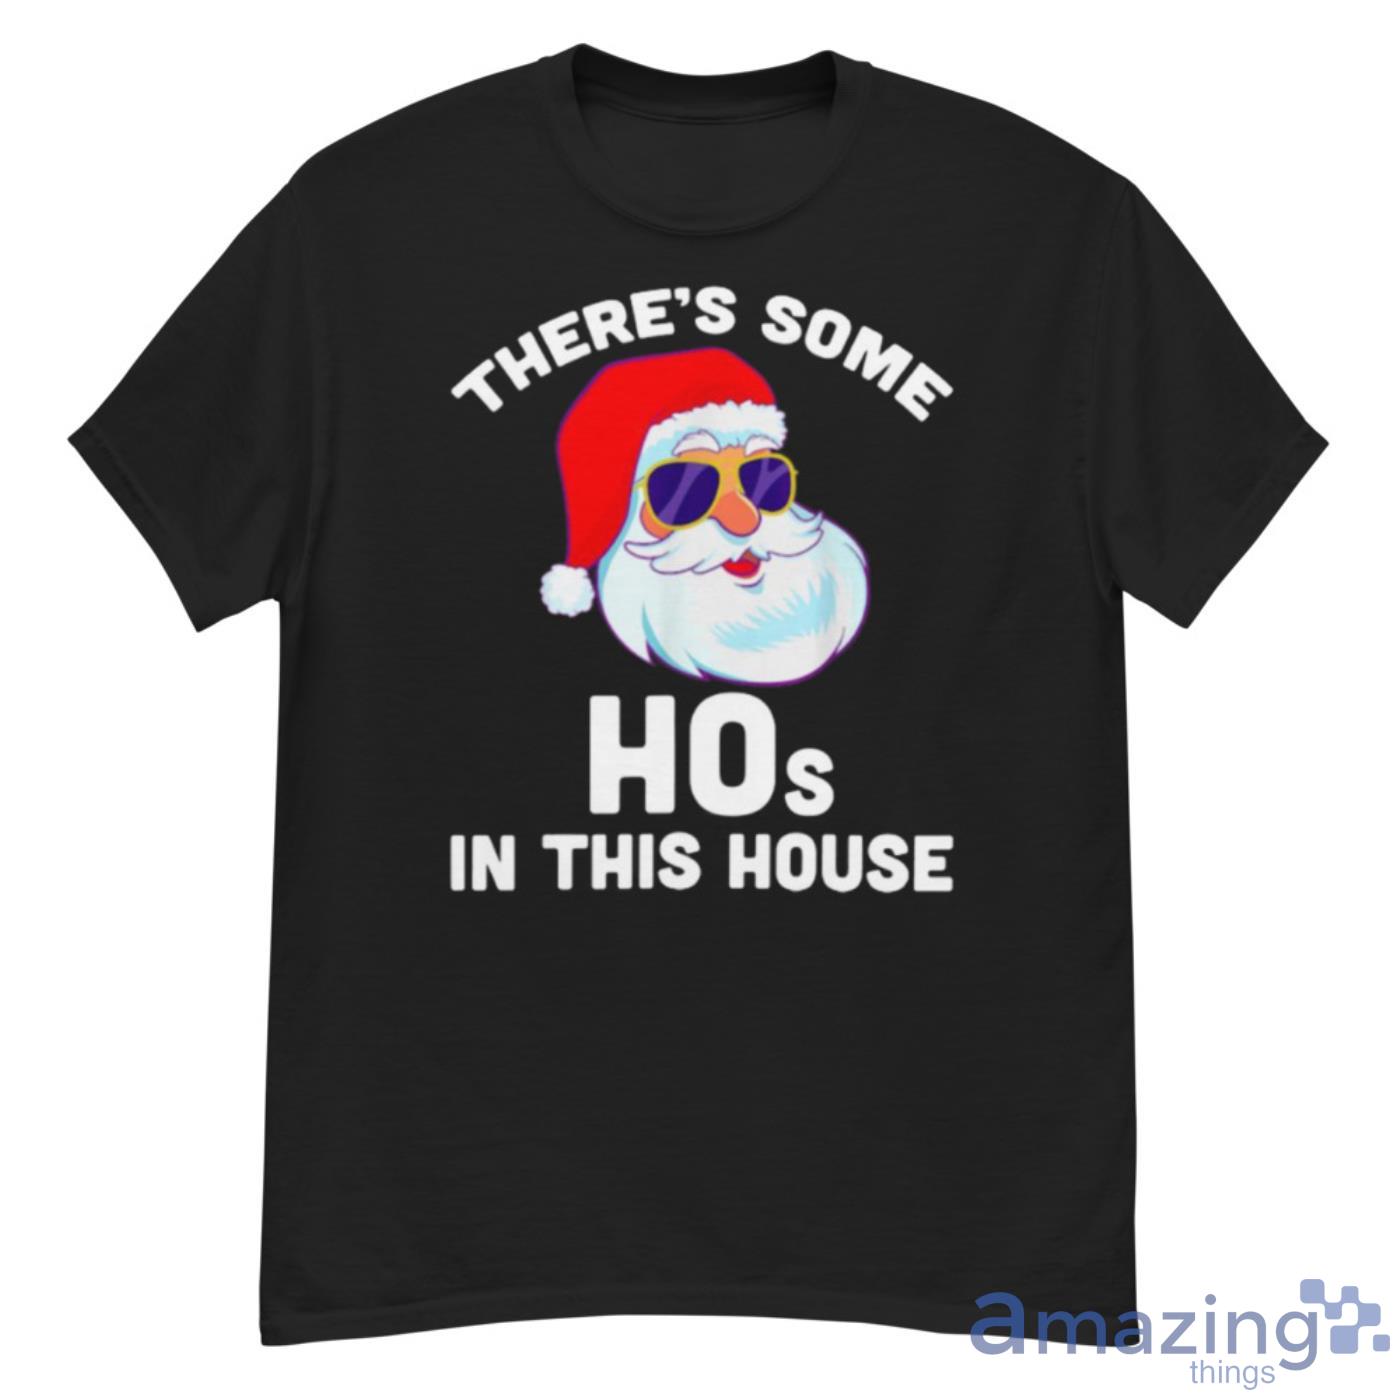 Theres Some Hos In This House Christmas Santa Claus Shirt - G500 Men’s Classic T-Shirt